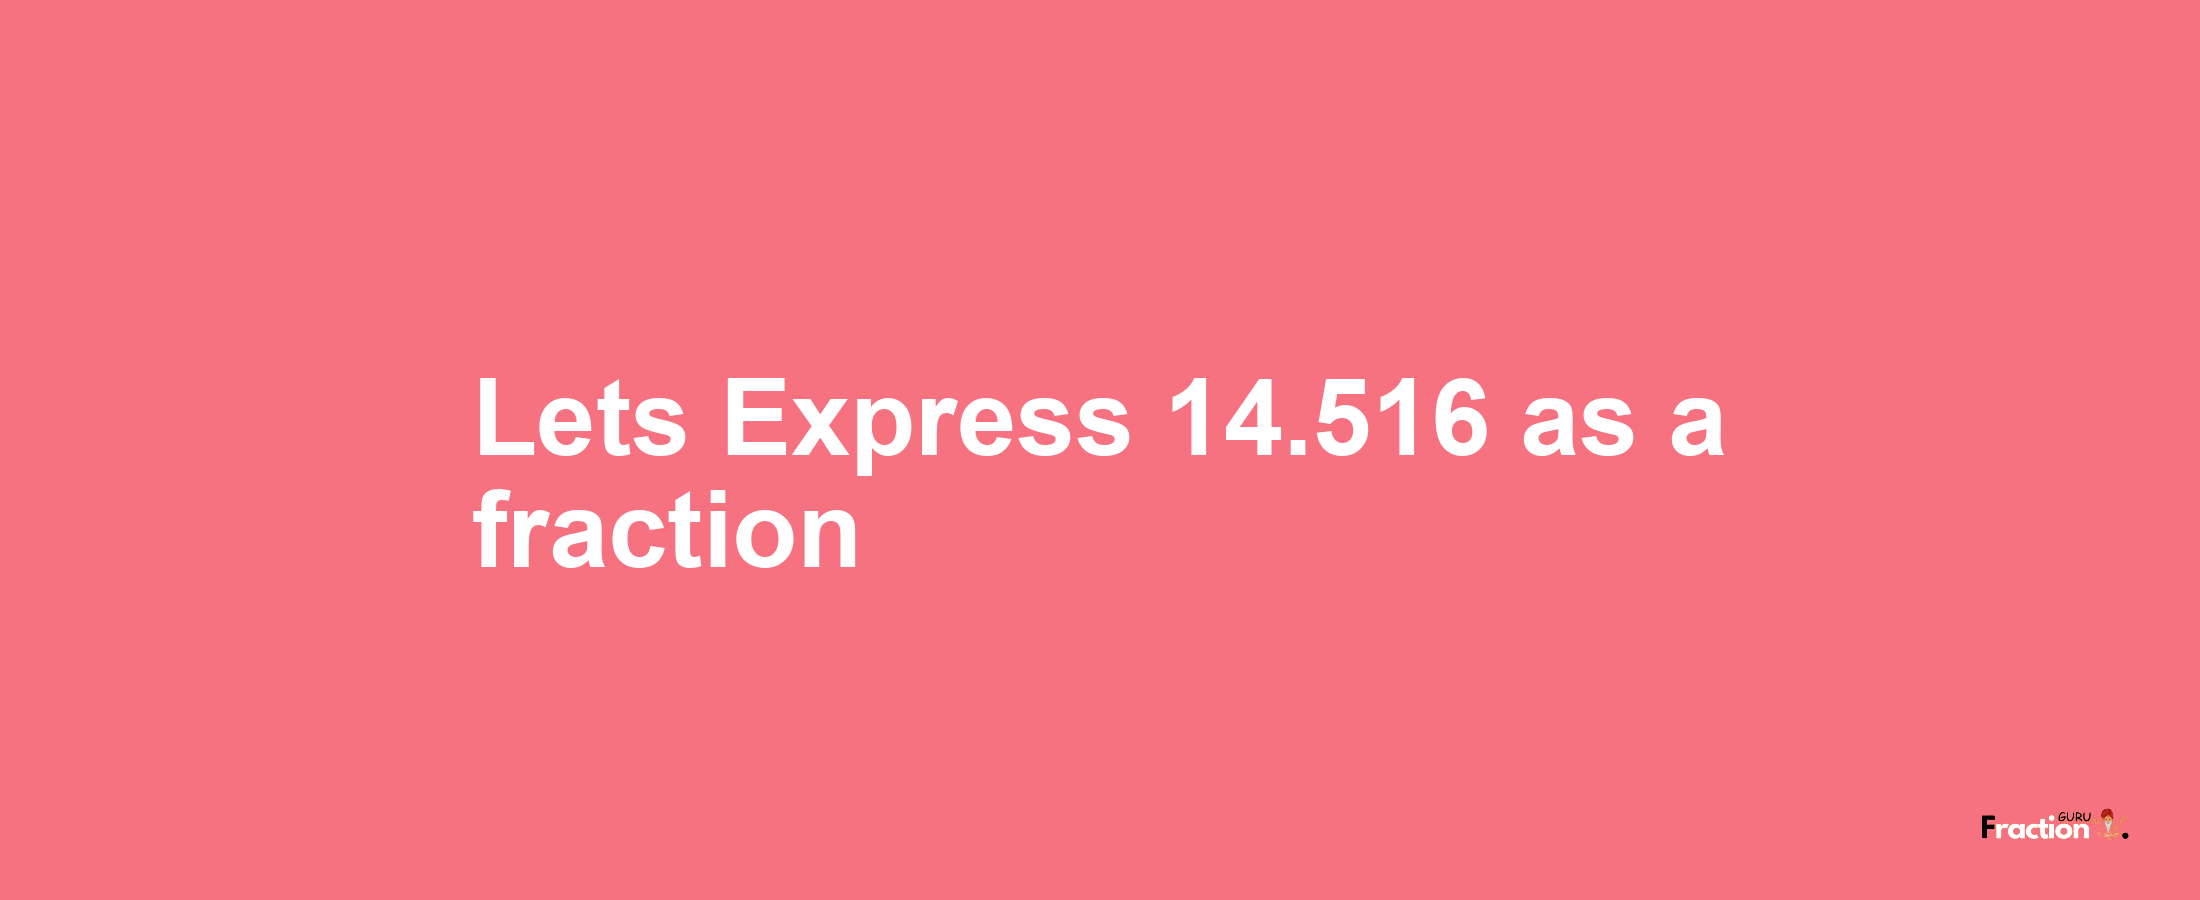 Lets Express 14.516 as afraction